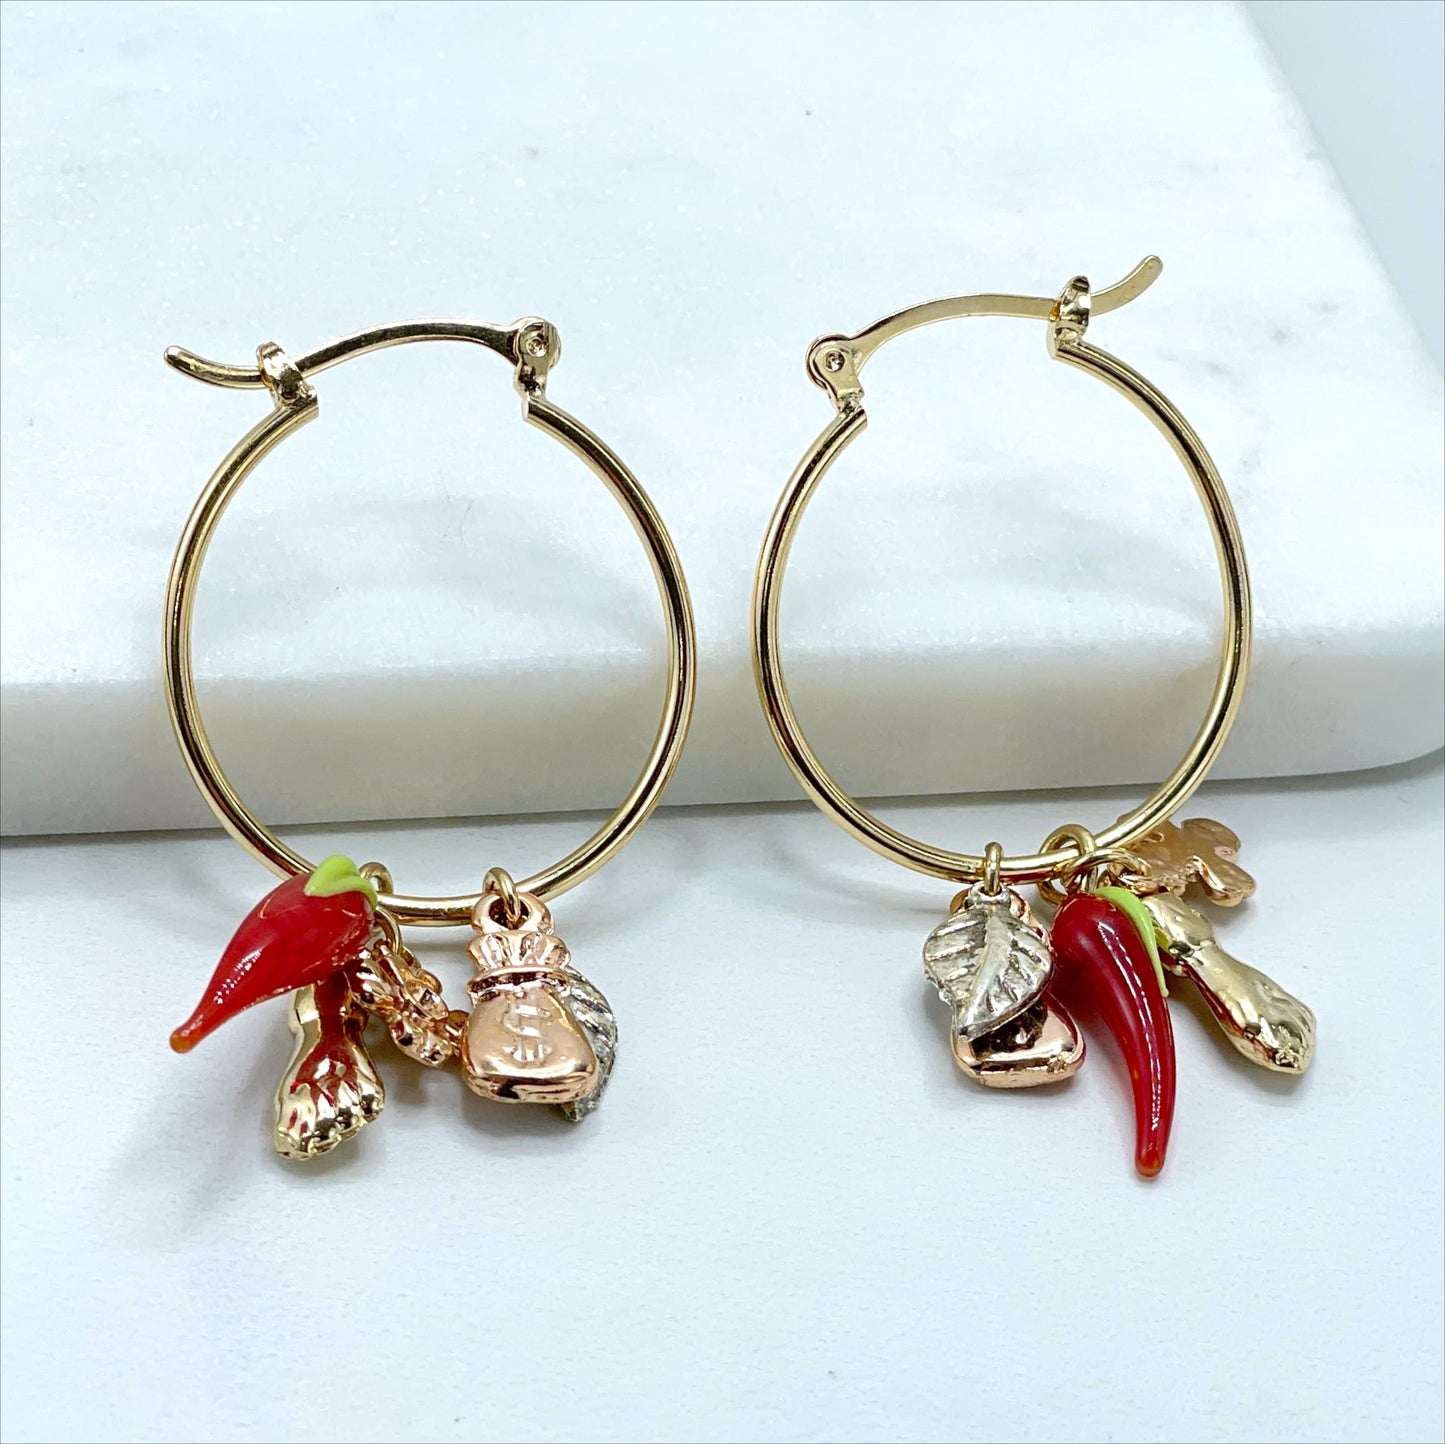 18k Gold Filled Lucky Luck Hoops with Chili, Money Bag, Leaf, Hand & Clover Charms, 28mm Hoops Earrings, Wholesale Jewelry Making Supplies